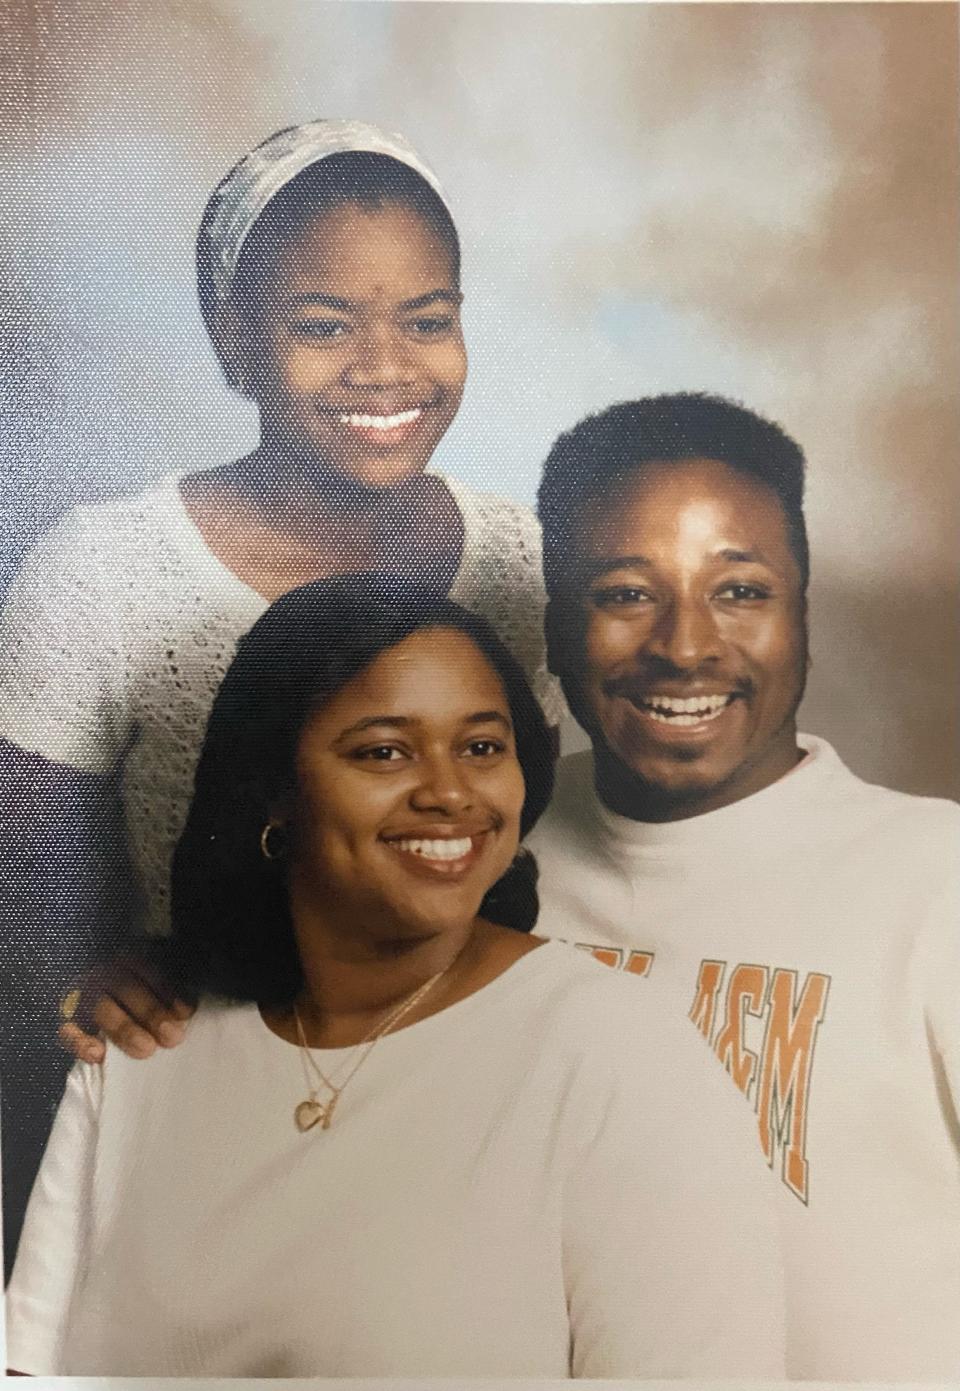 FAMU Faculty Union President Roscoe Hightower, his older sister Cynthia Hightower-Hammett, and his niece Emily in 1998.